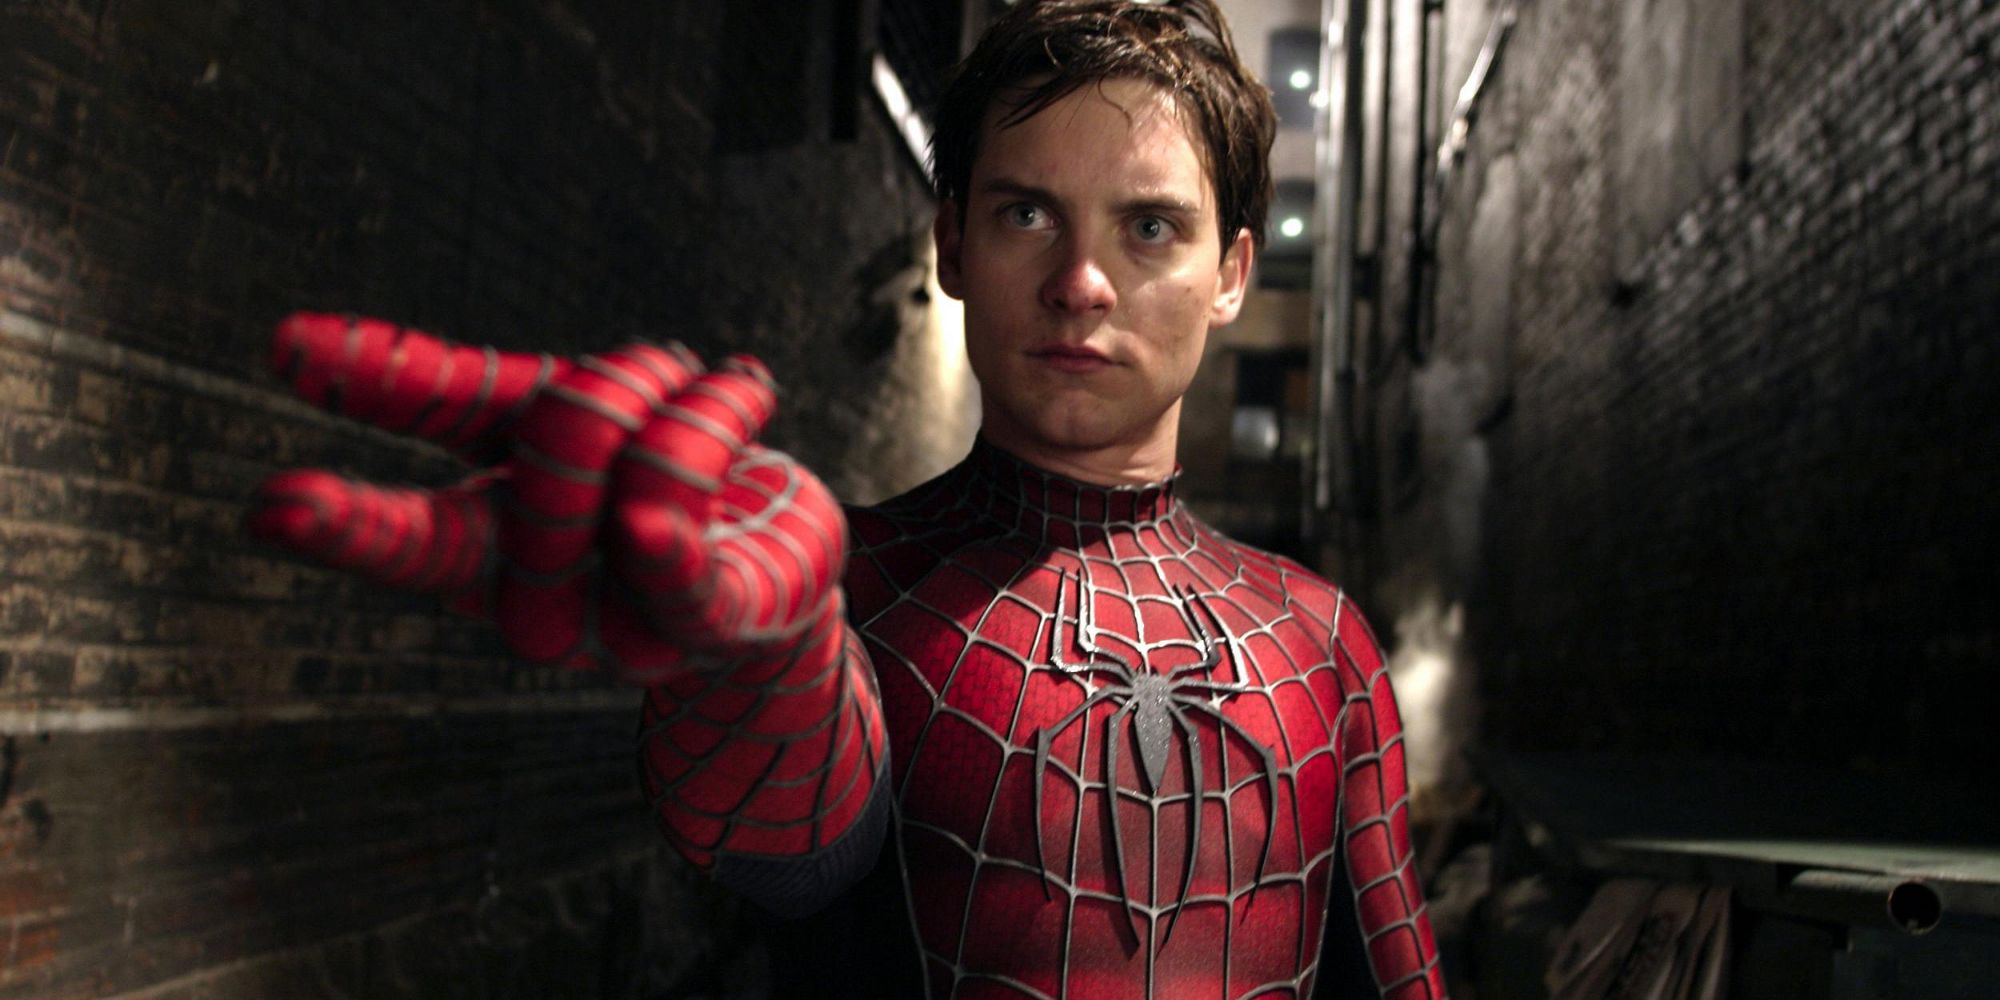 Tobey Maguire's Spider-Man shooting webs in an alley